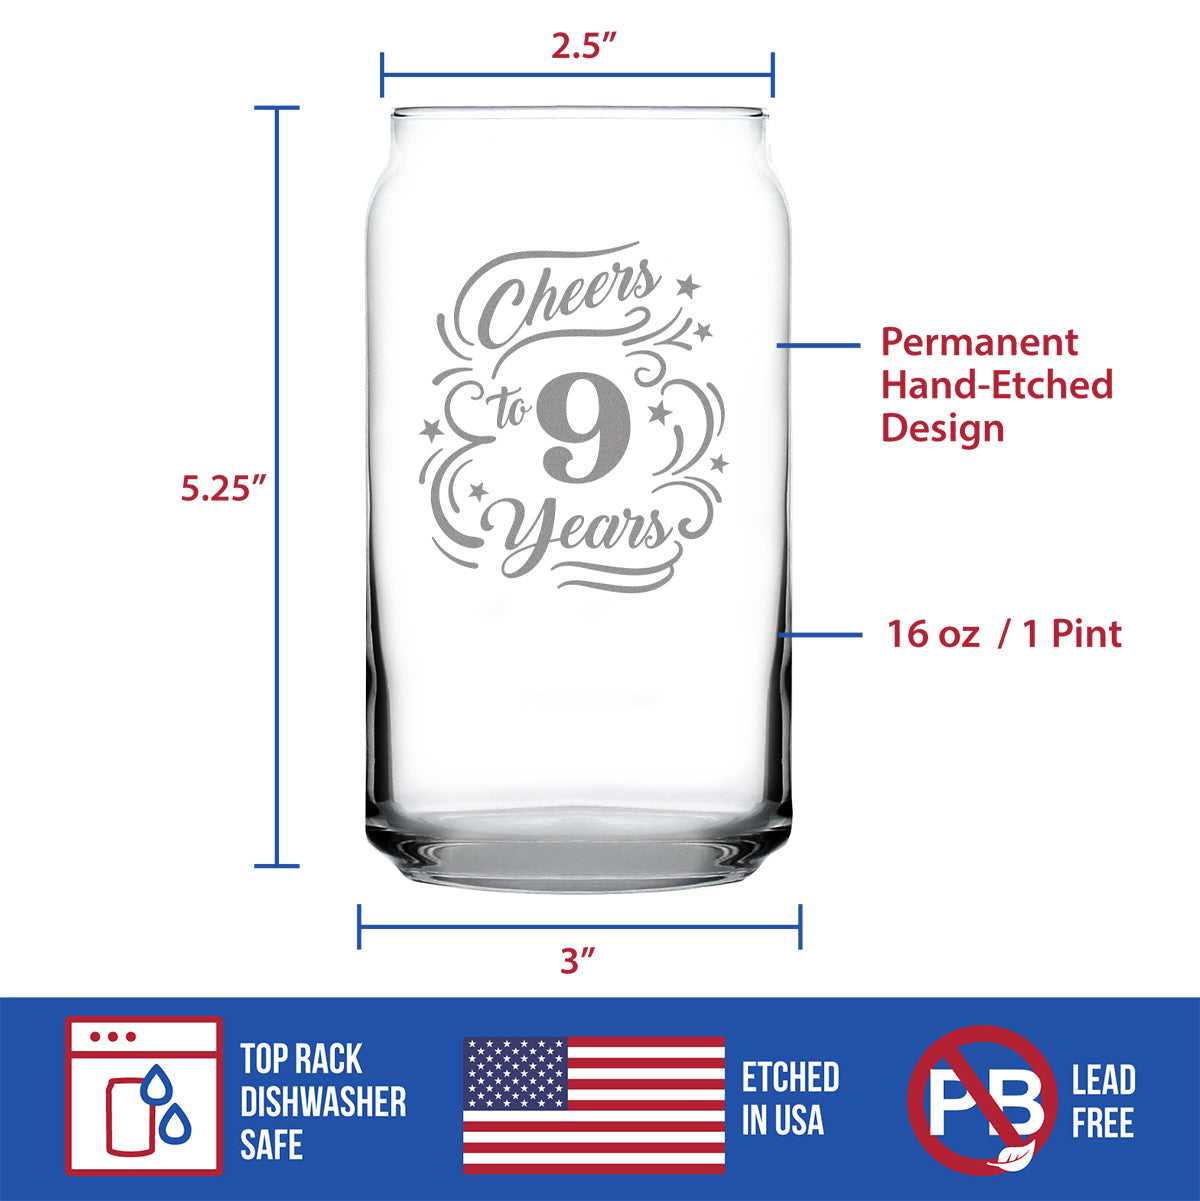 Cheers to 9 Years - Beer Can Pint Glass Gifts for Women &amp; Men - 9th Anniversary Party Decor - 16 Oz Glasses